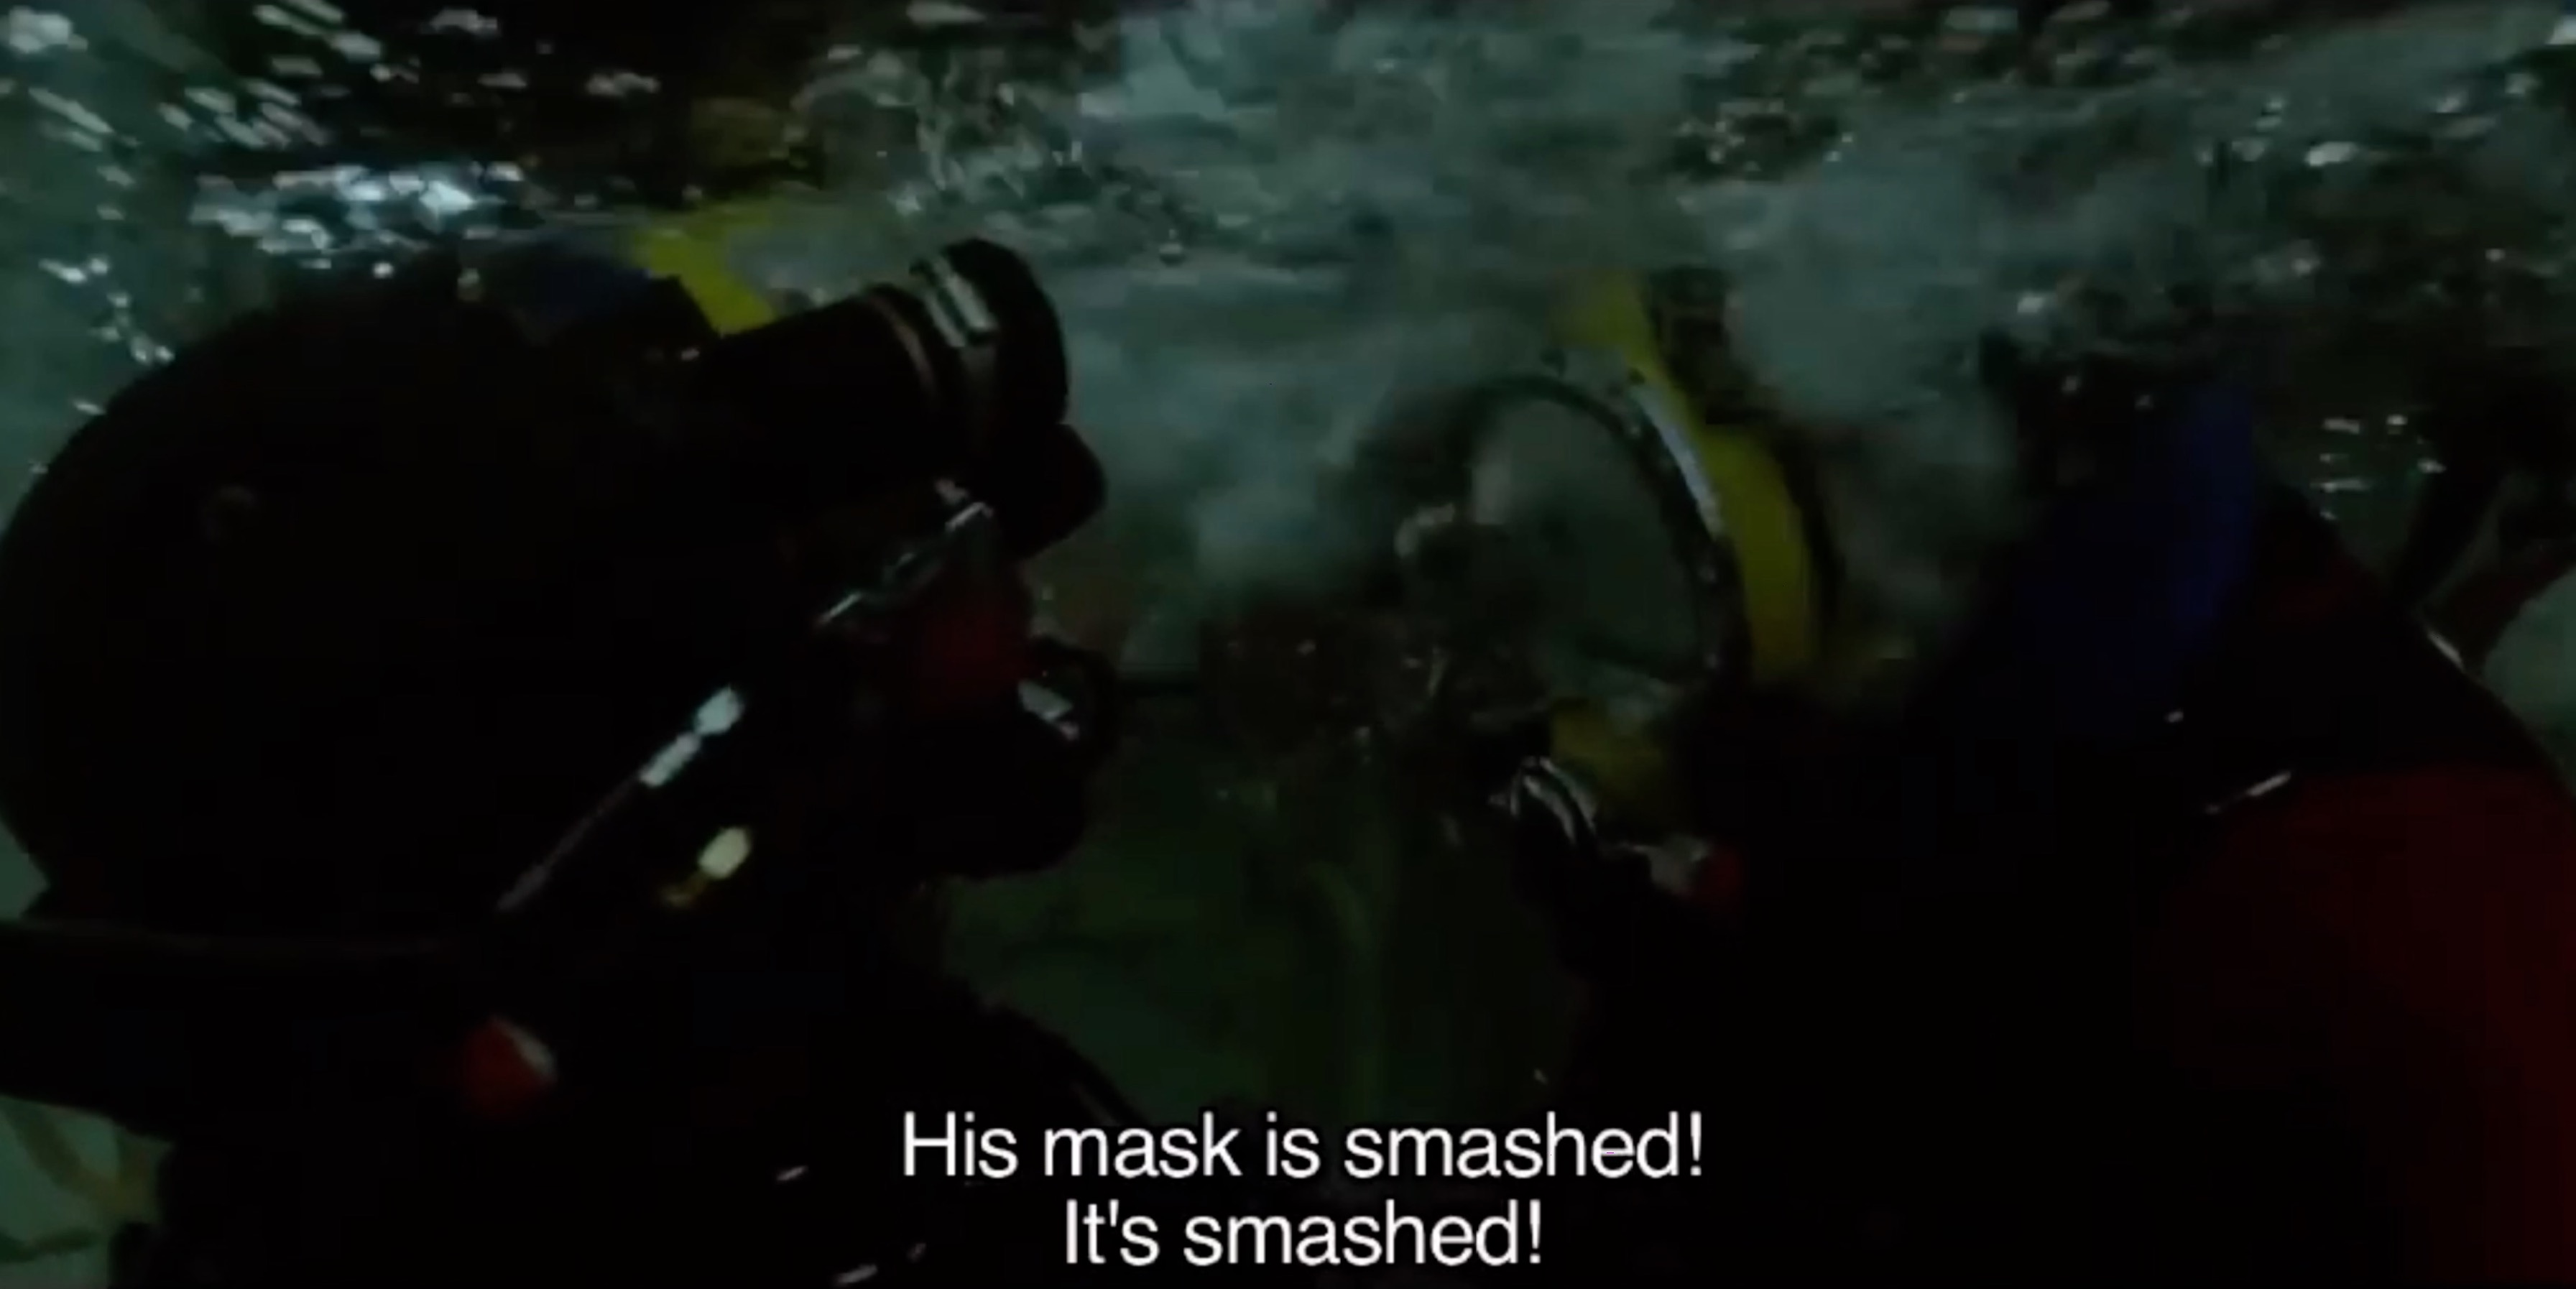 Deep Sea Diver risks his own Life to Save Dive Buddy